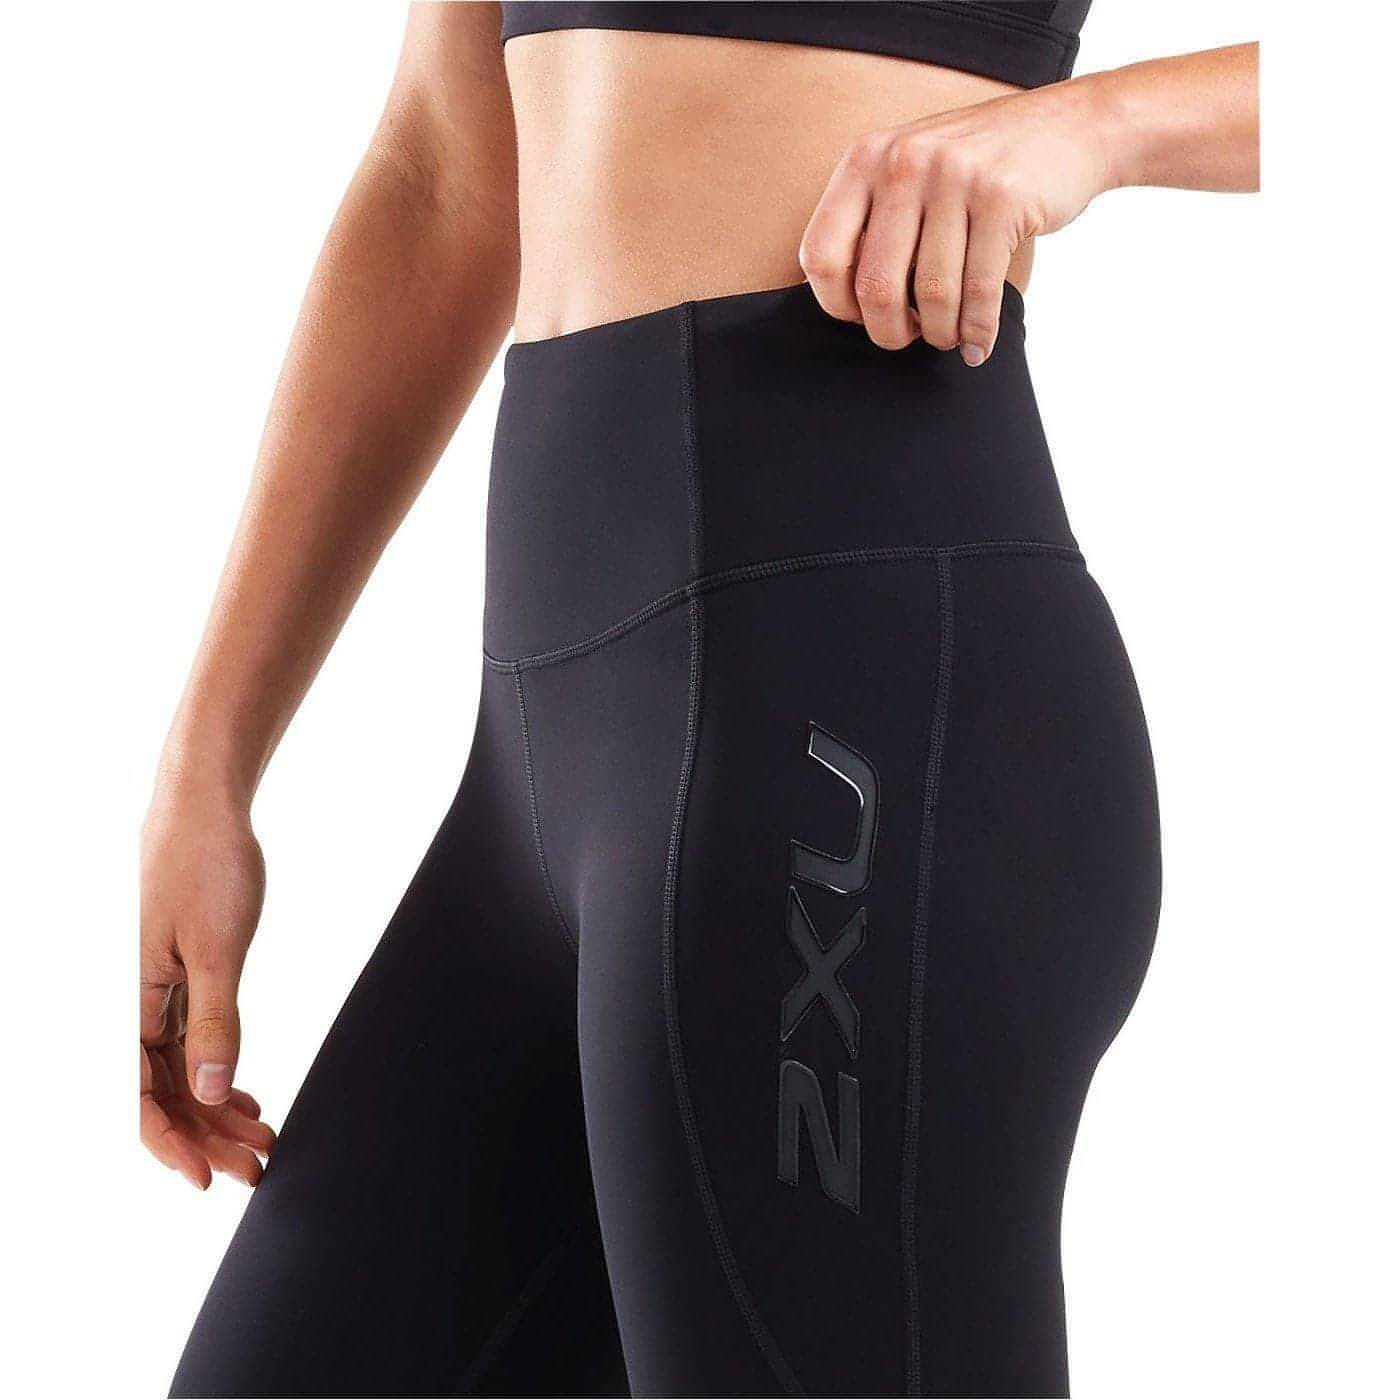 2XU Fitness New Heights Compression Womens Short Running Tights